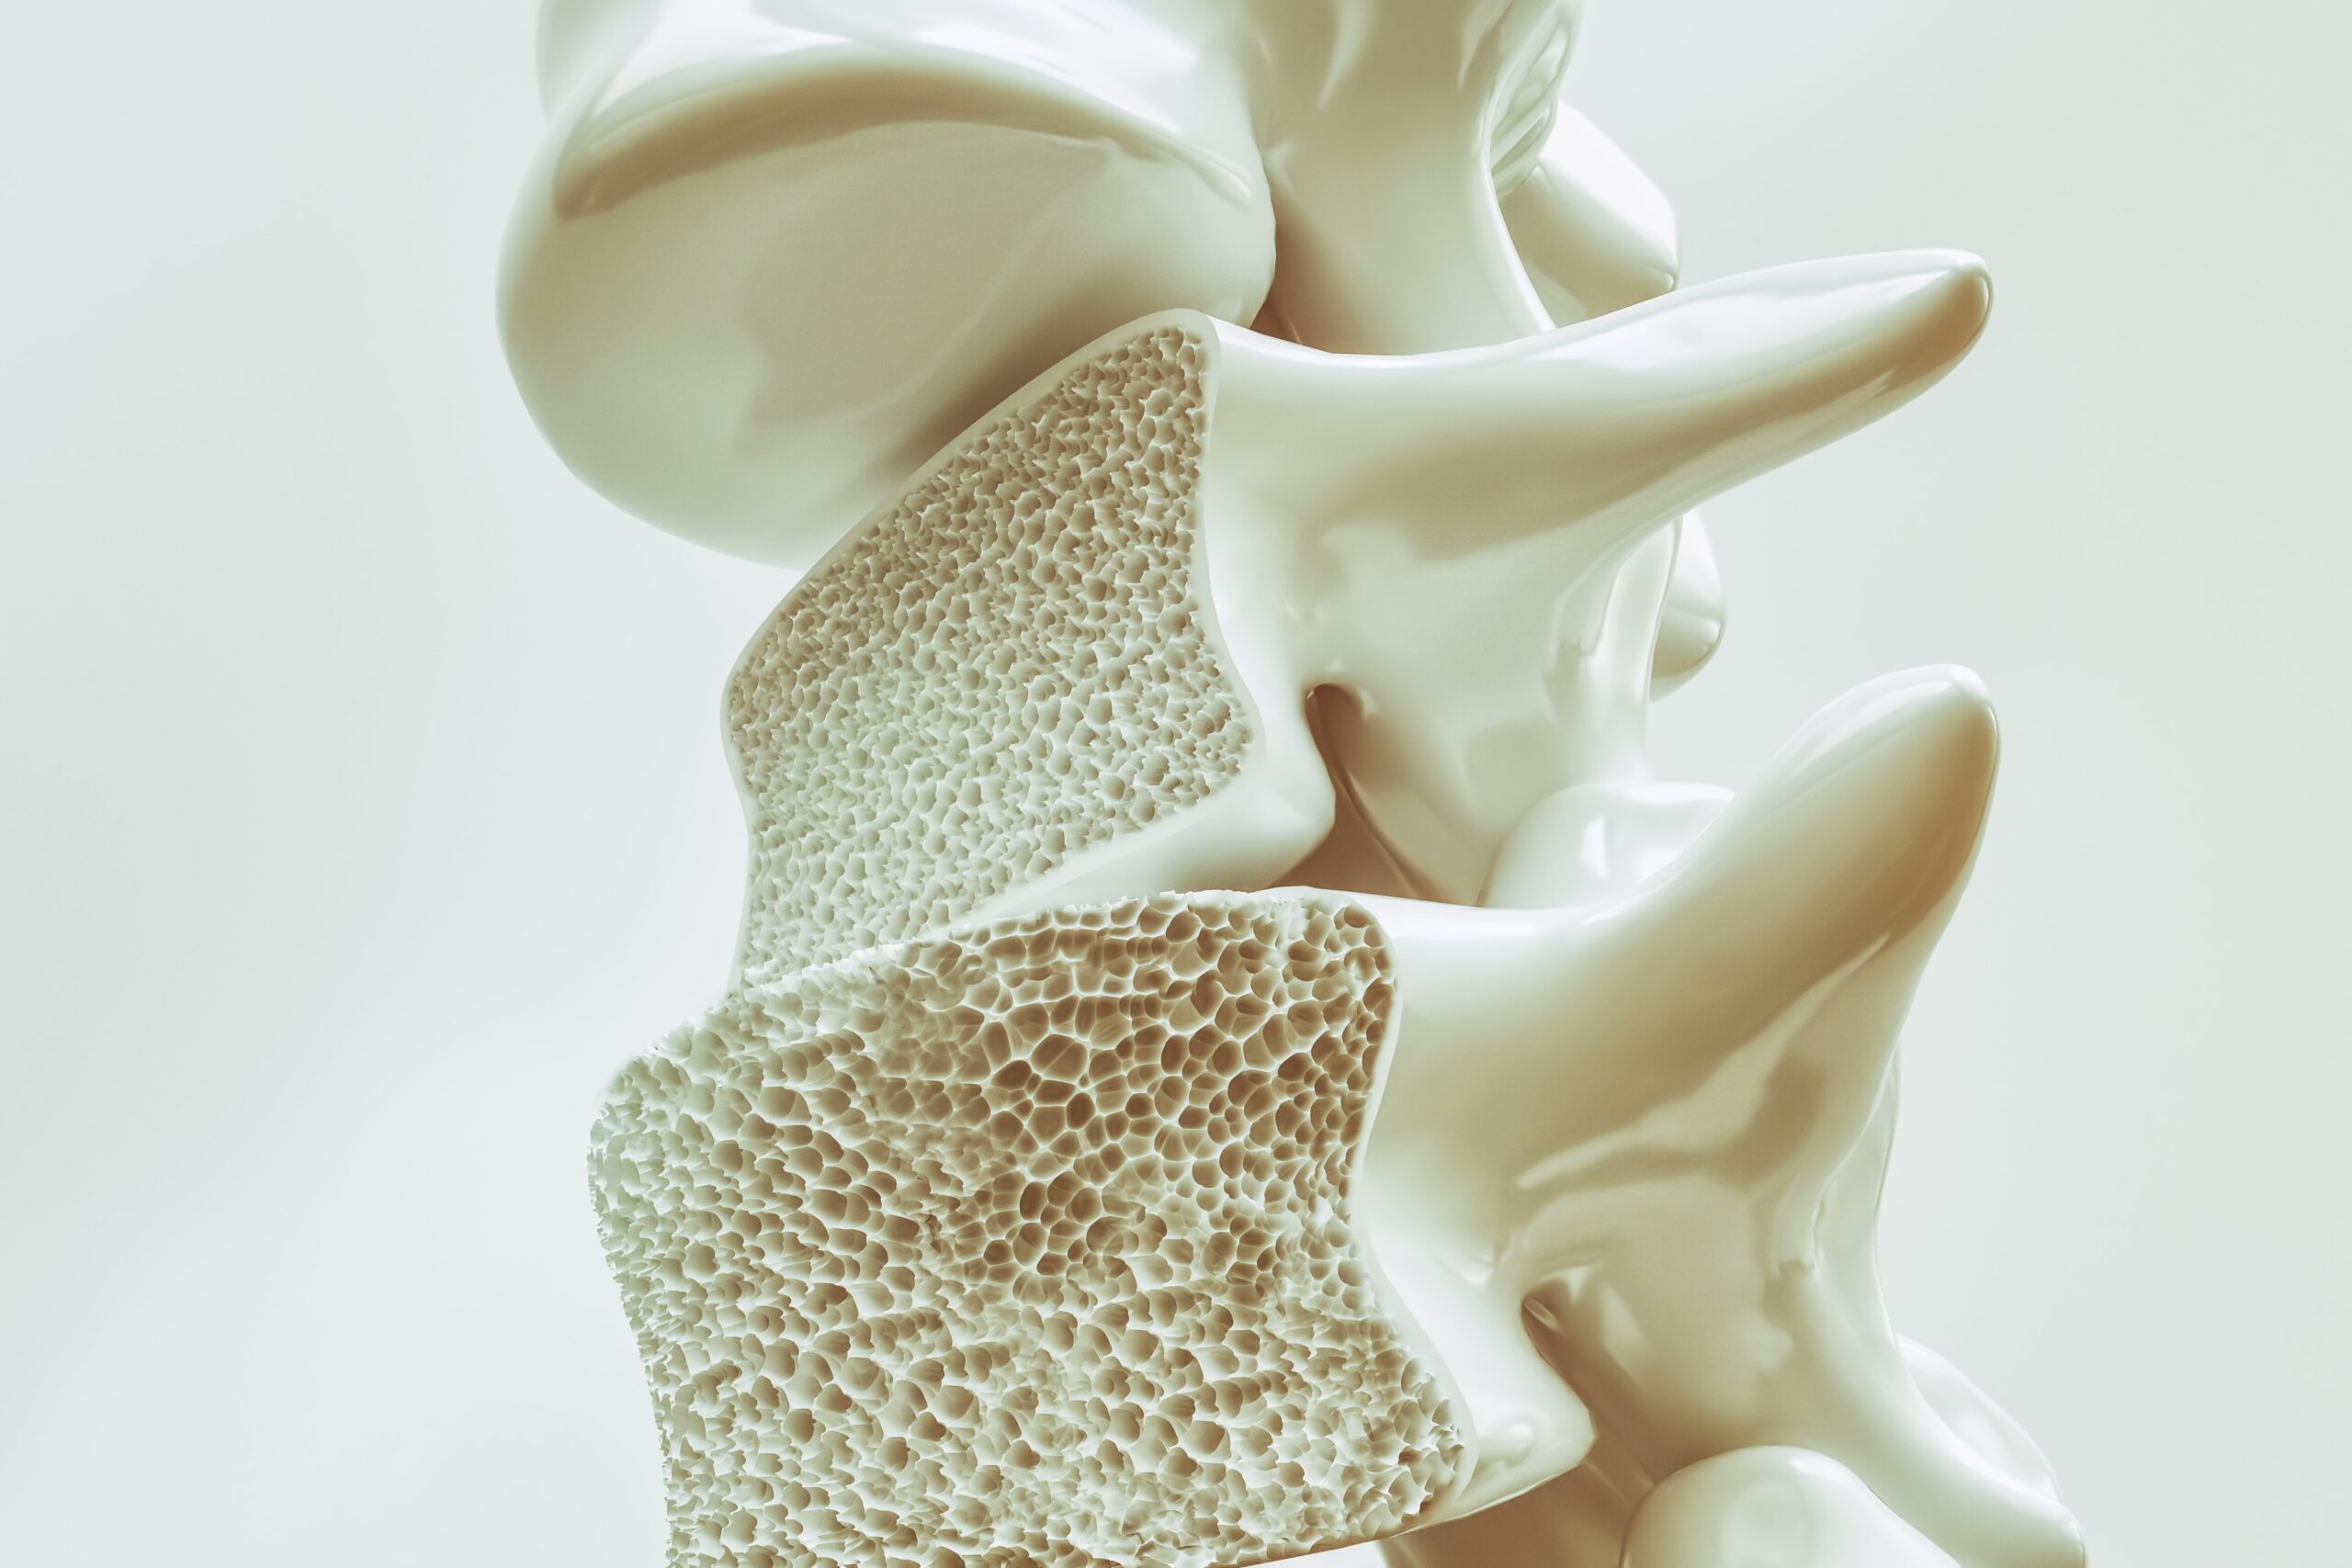 Osteoporosis on the spine - 3d rendering